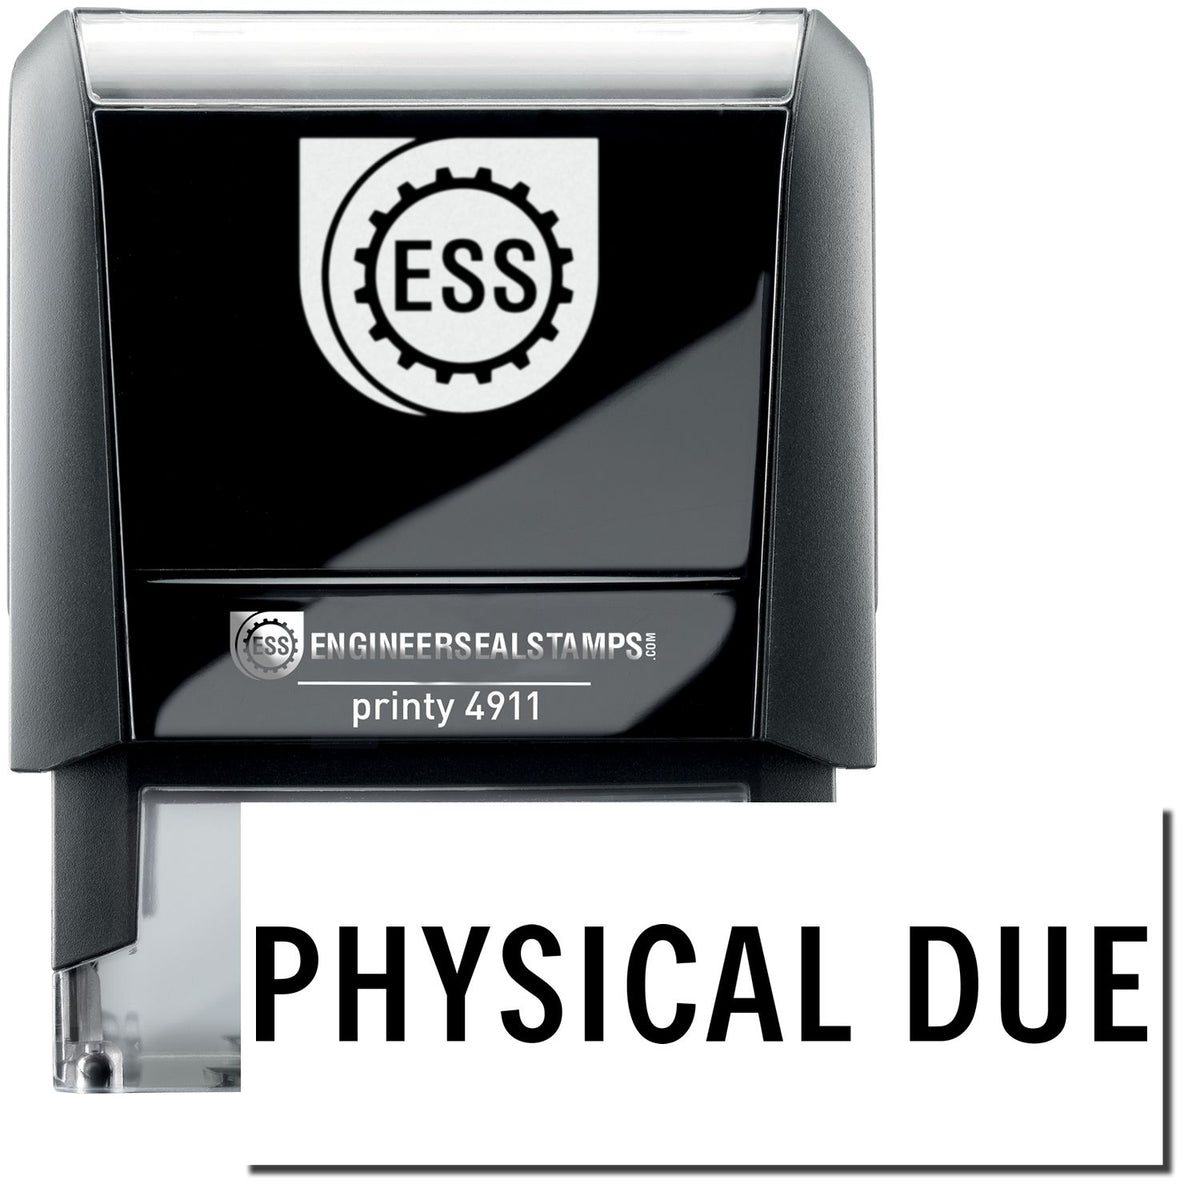 A self-inking stamp with a stamped image showing how the text &quot;PHYSICAL DUE&quot; is displayed after stamping.